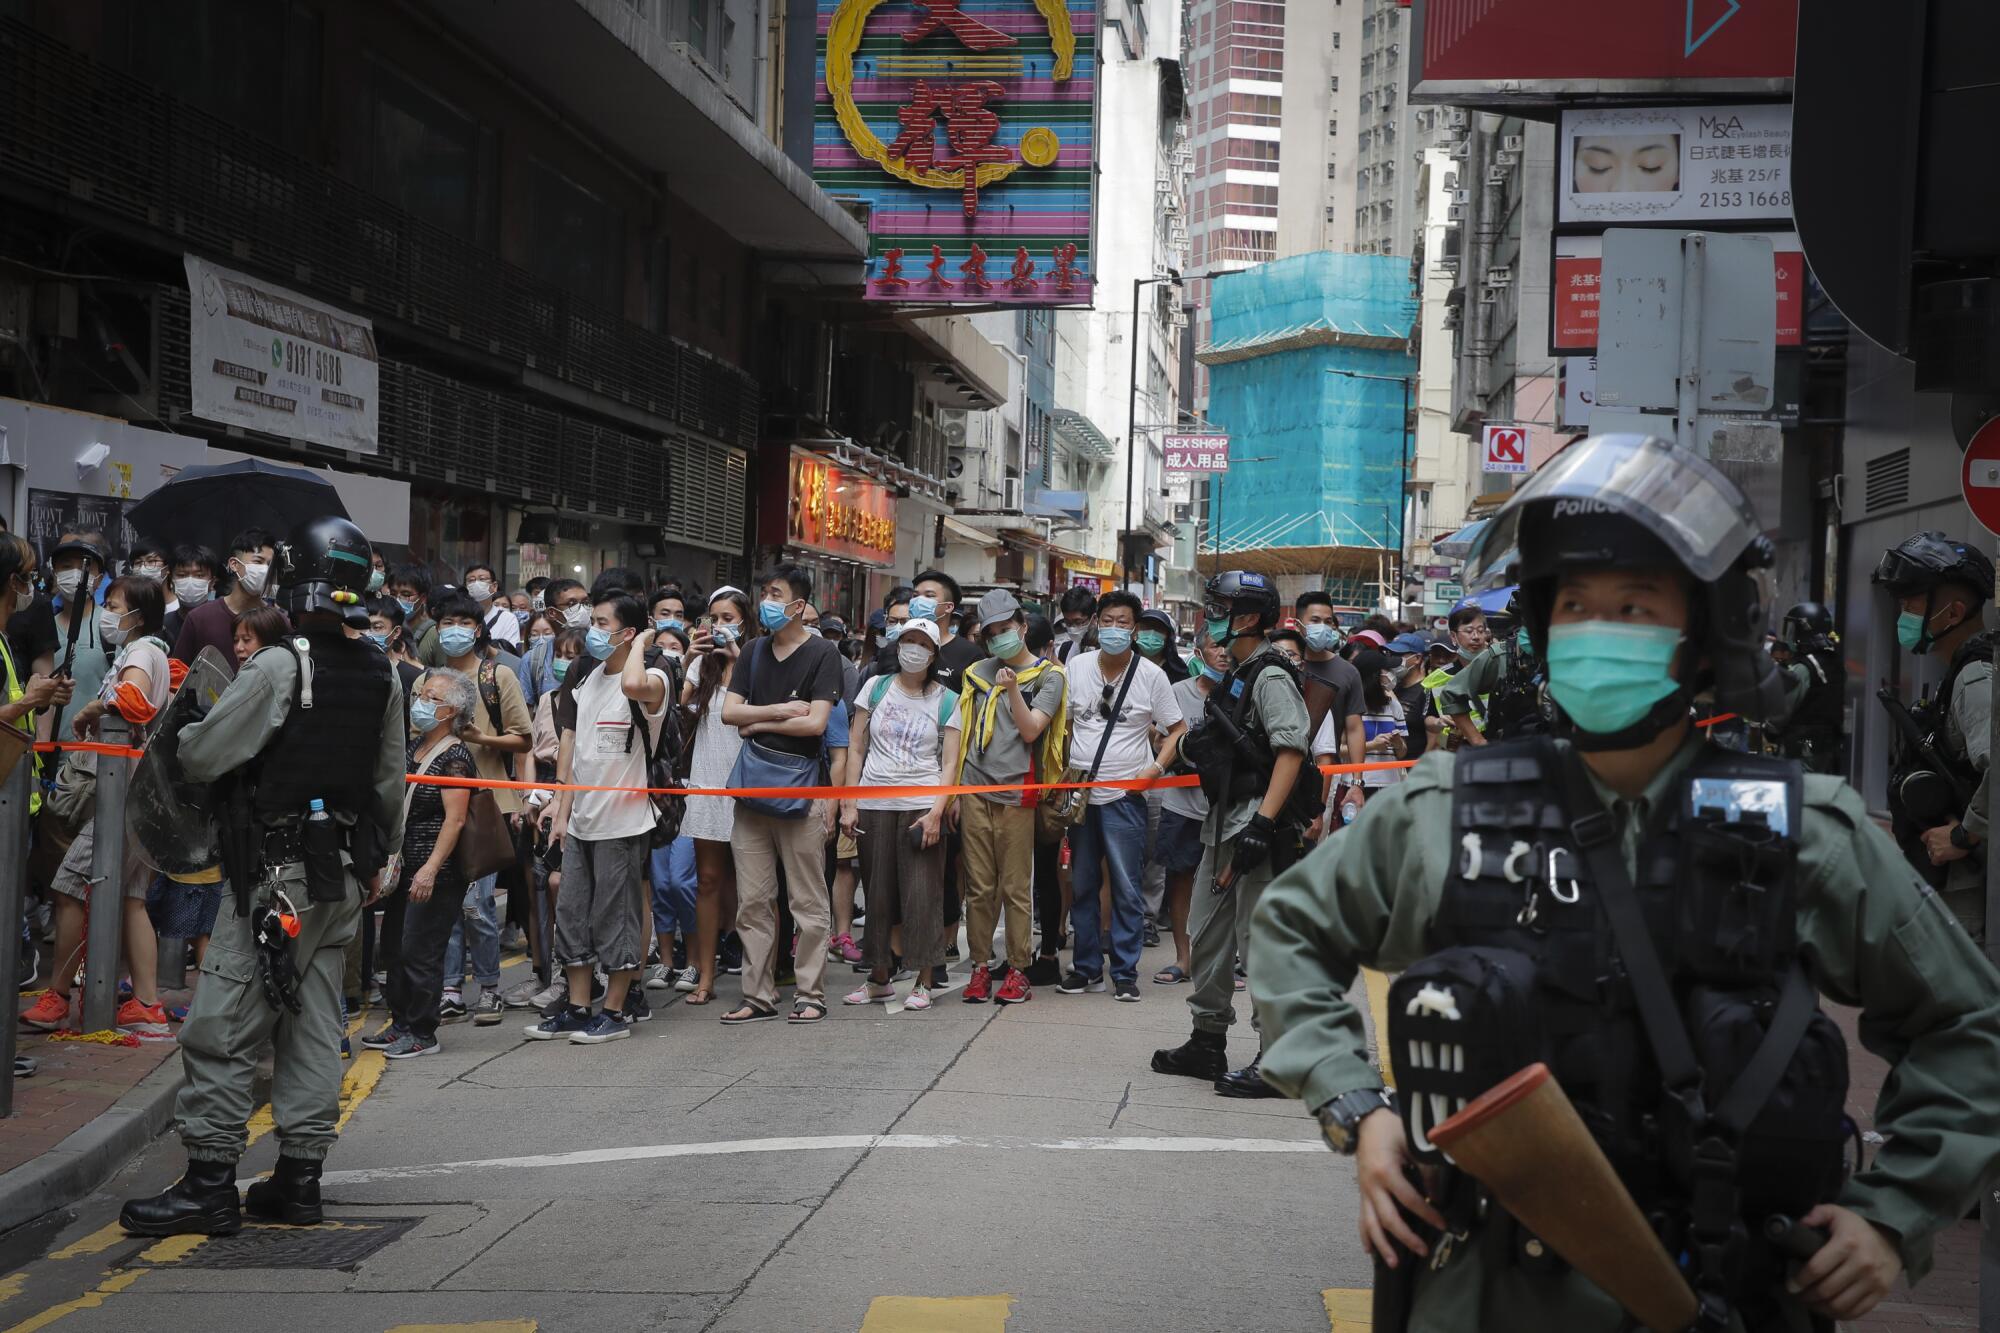 Police create a perimeter to control protesters in Causeway Bay before the annual handover march in Hong Kong on Wednesday.